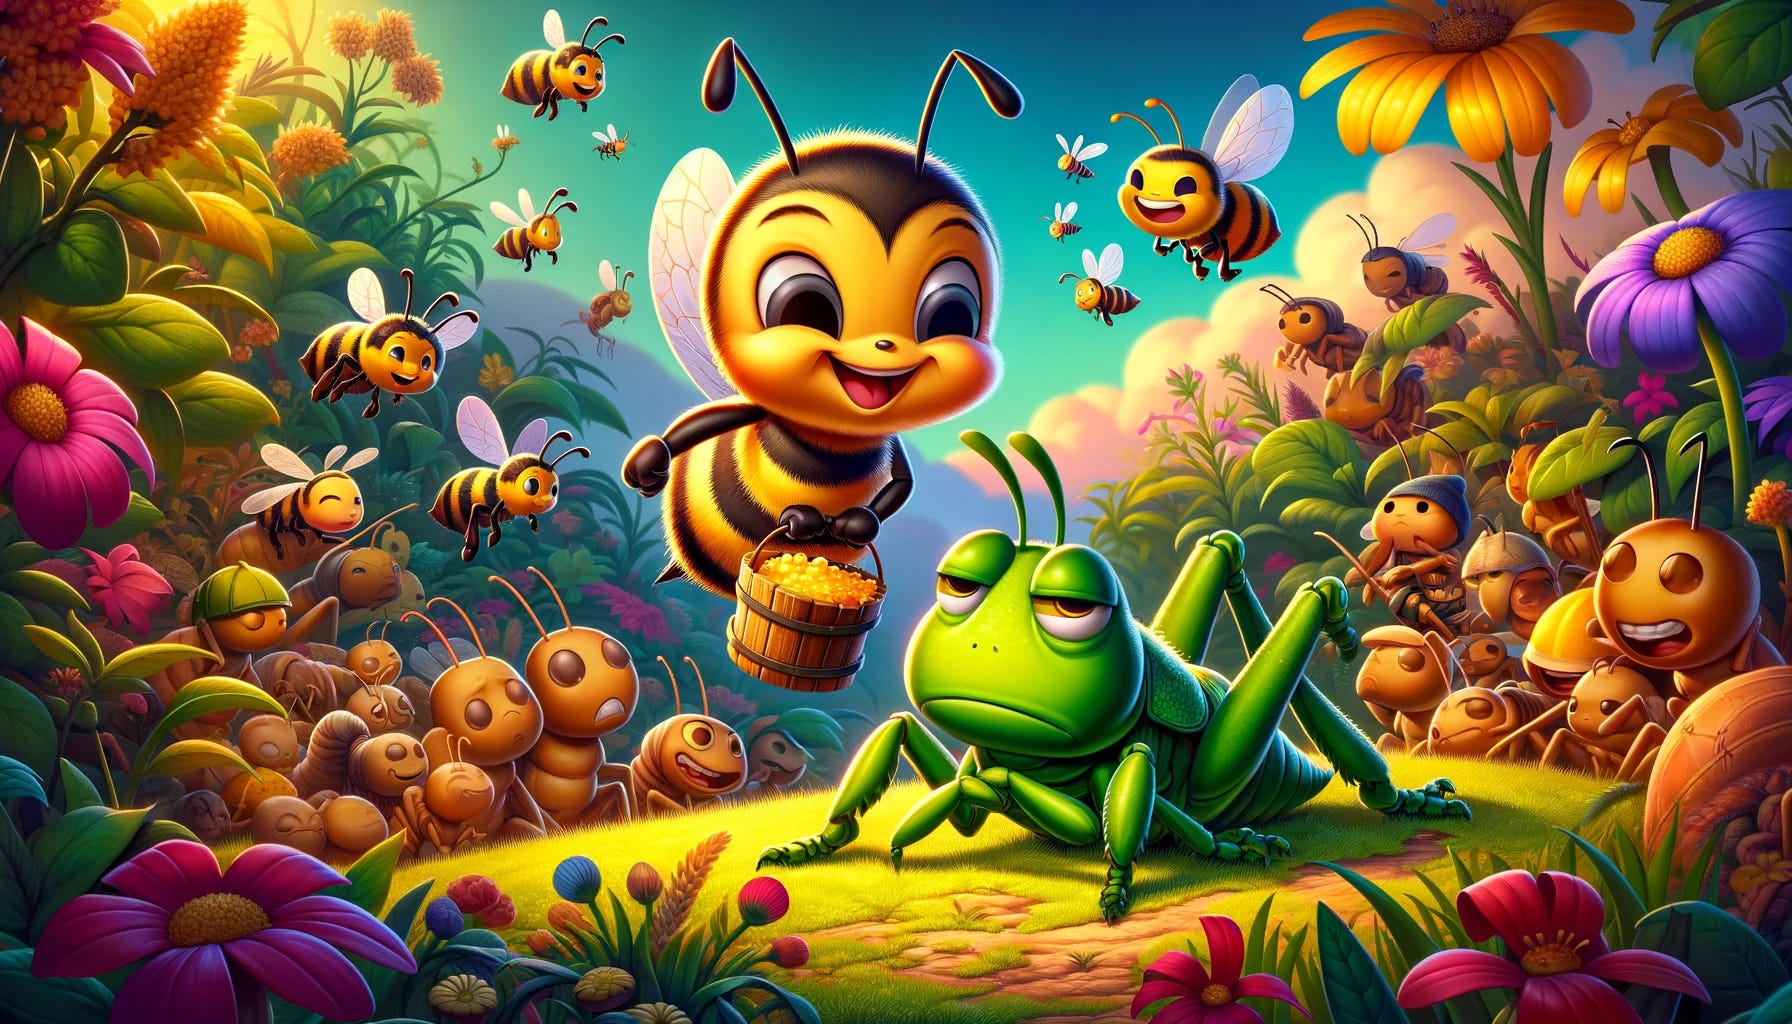 A working bee happily carrying some honey, and an unhappy grasshoper in the middle of lushing flora and fauna in a cartoony setting.